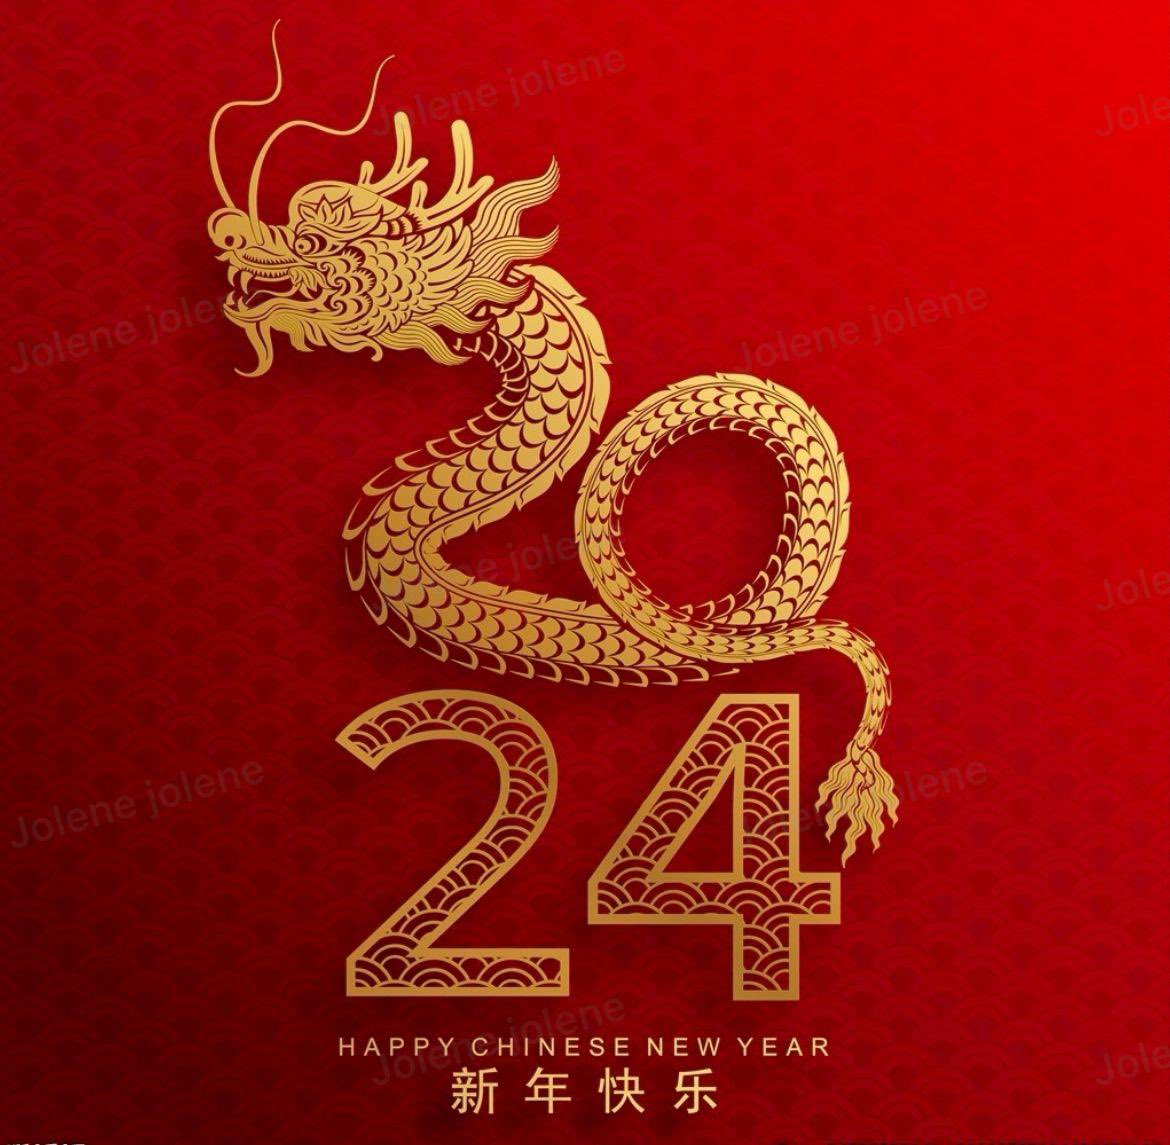 May the Year of the Dragon bless you with abundant opportunities, happiness, and prosperity.

Together, let's embrace 2024 with vigor!

'Wishing you wealth and a Happy Lunar New Year! 🐉

#businessdeveloper
#blockchain
#CryptoCommunity 
#Crypto
#BTC 
#luna 
#Chinesenewyear